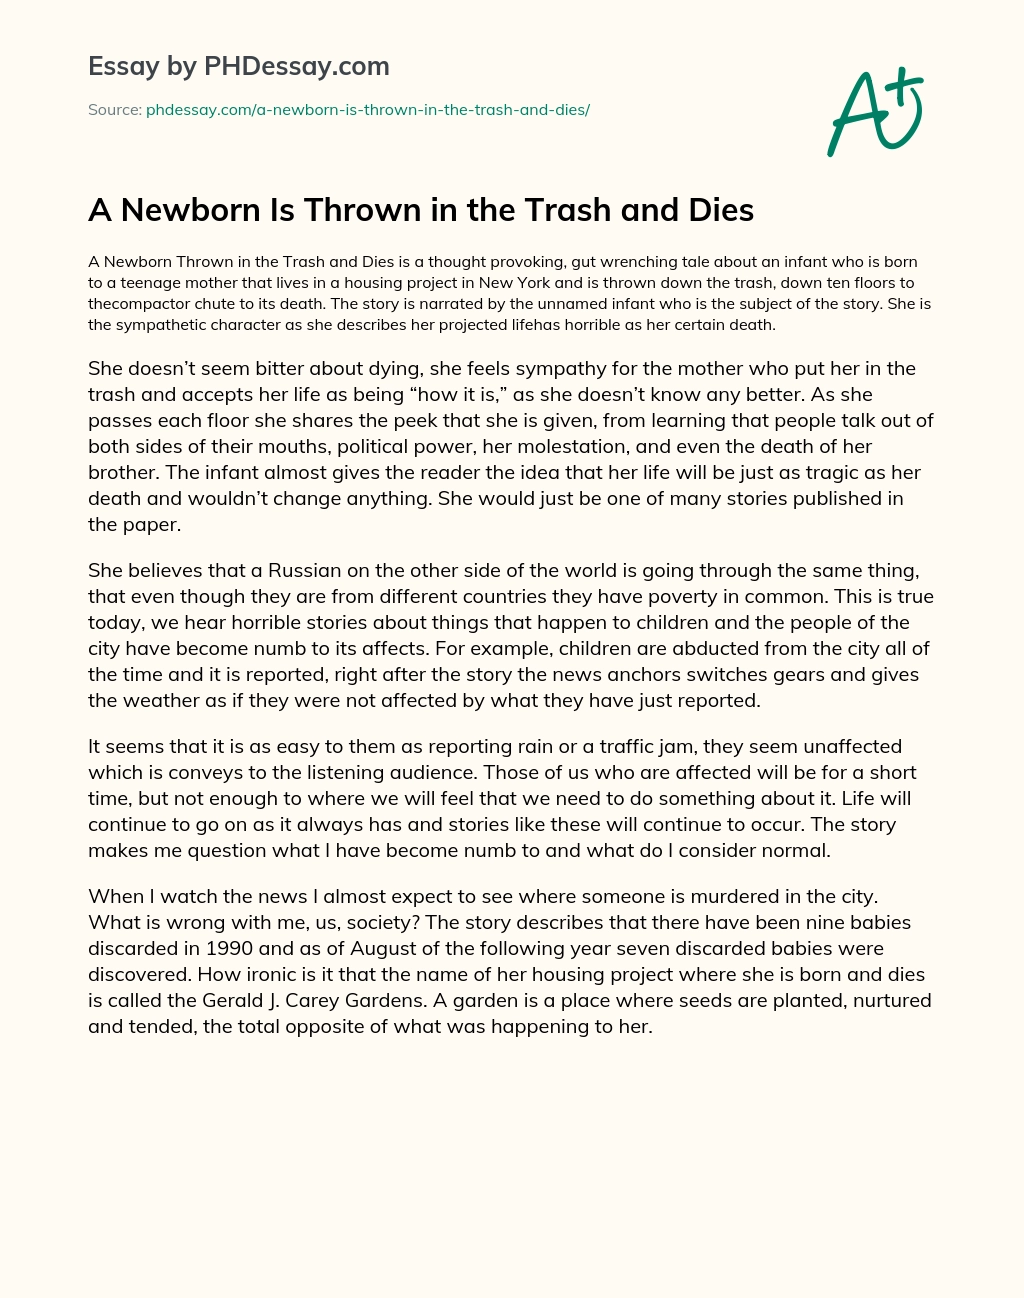 A Newborn Is Thrown in the Trash and Dies essay